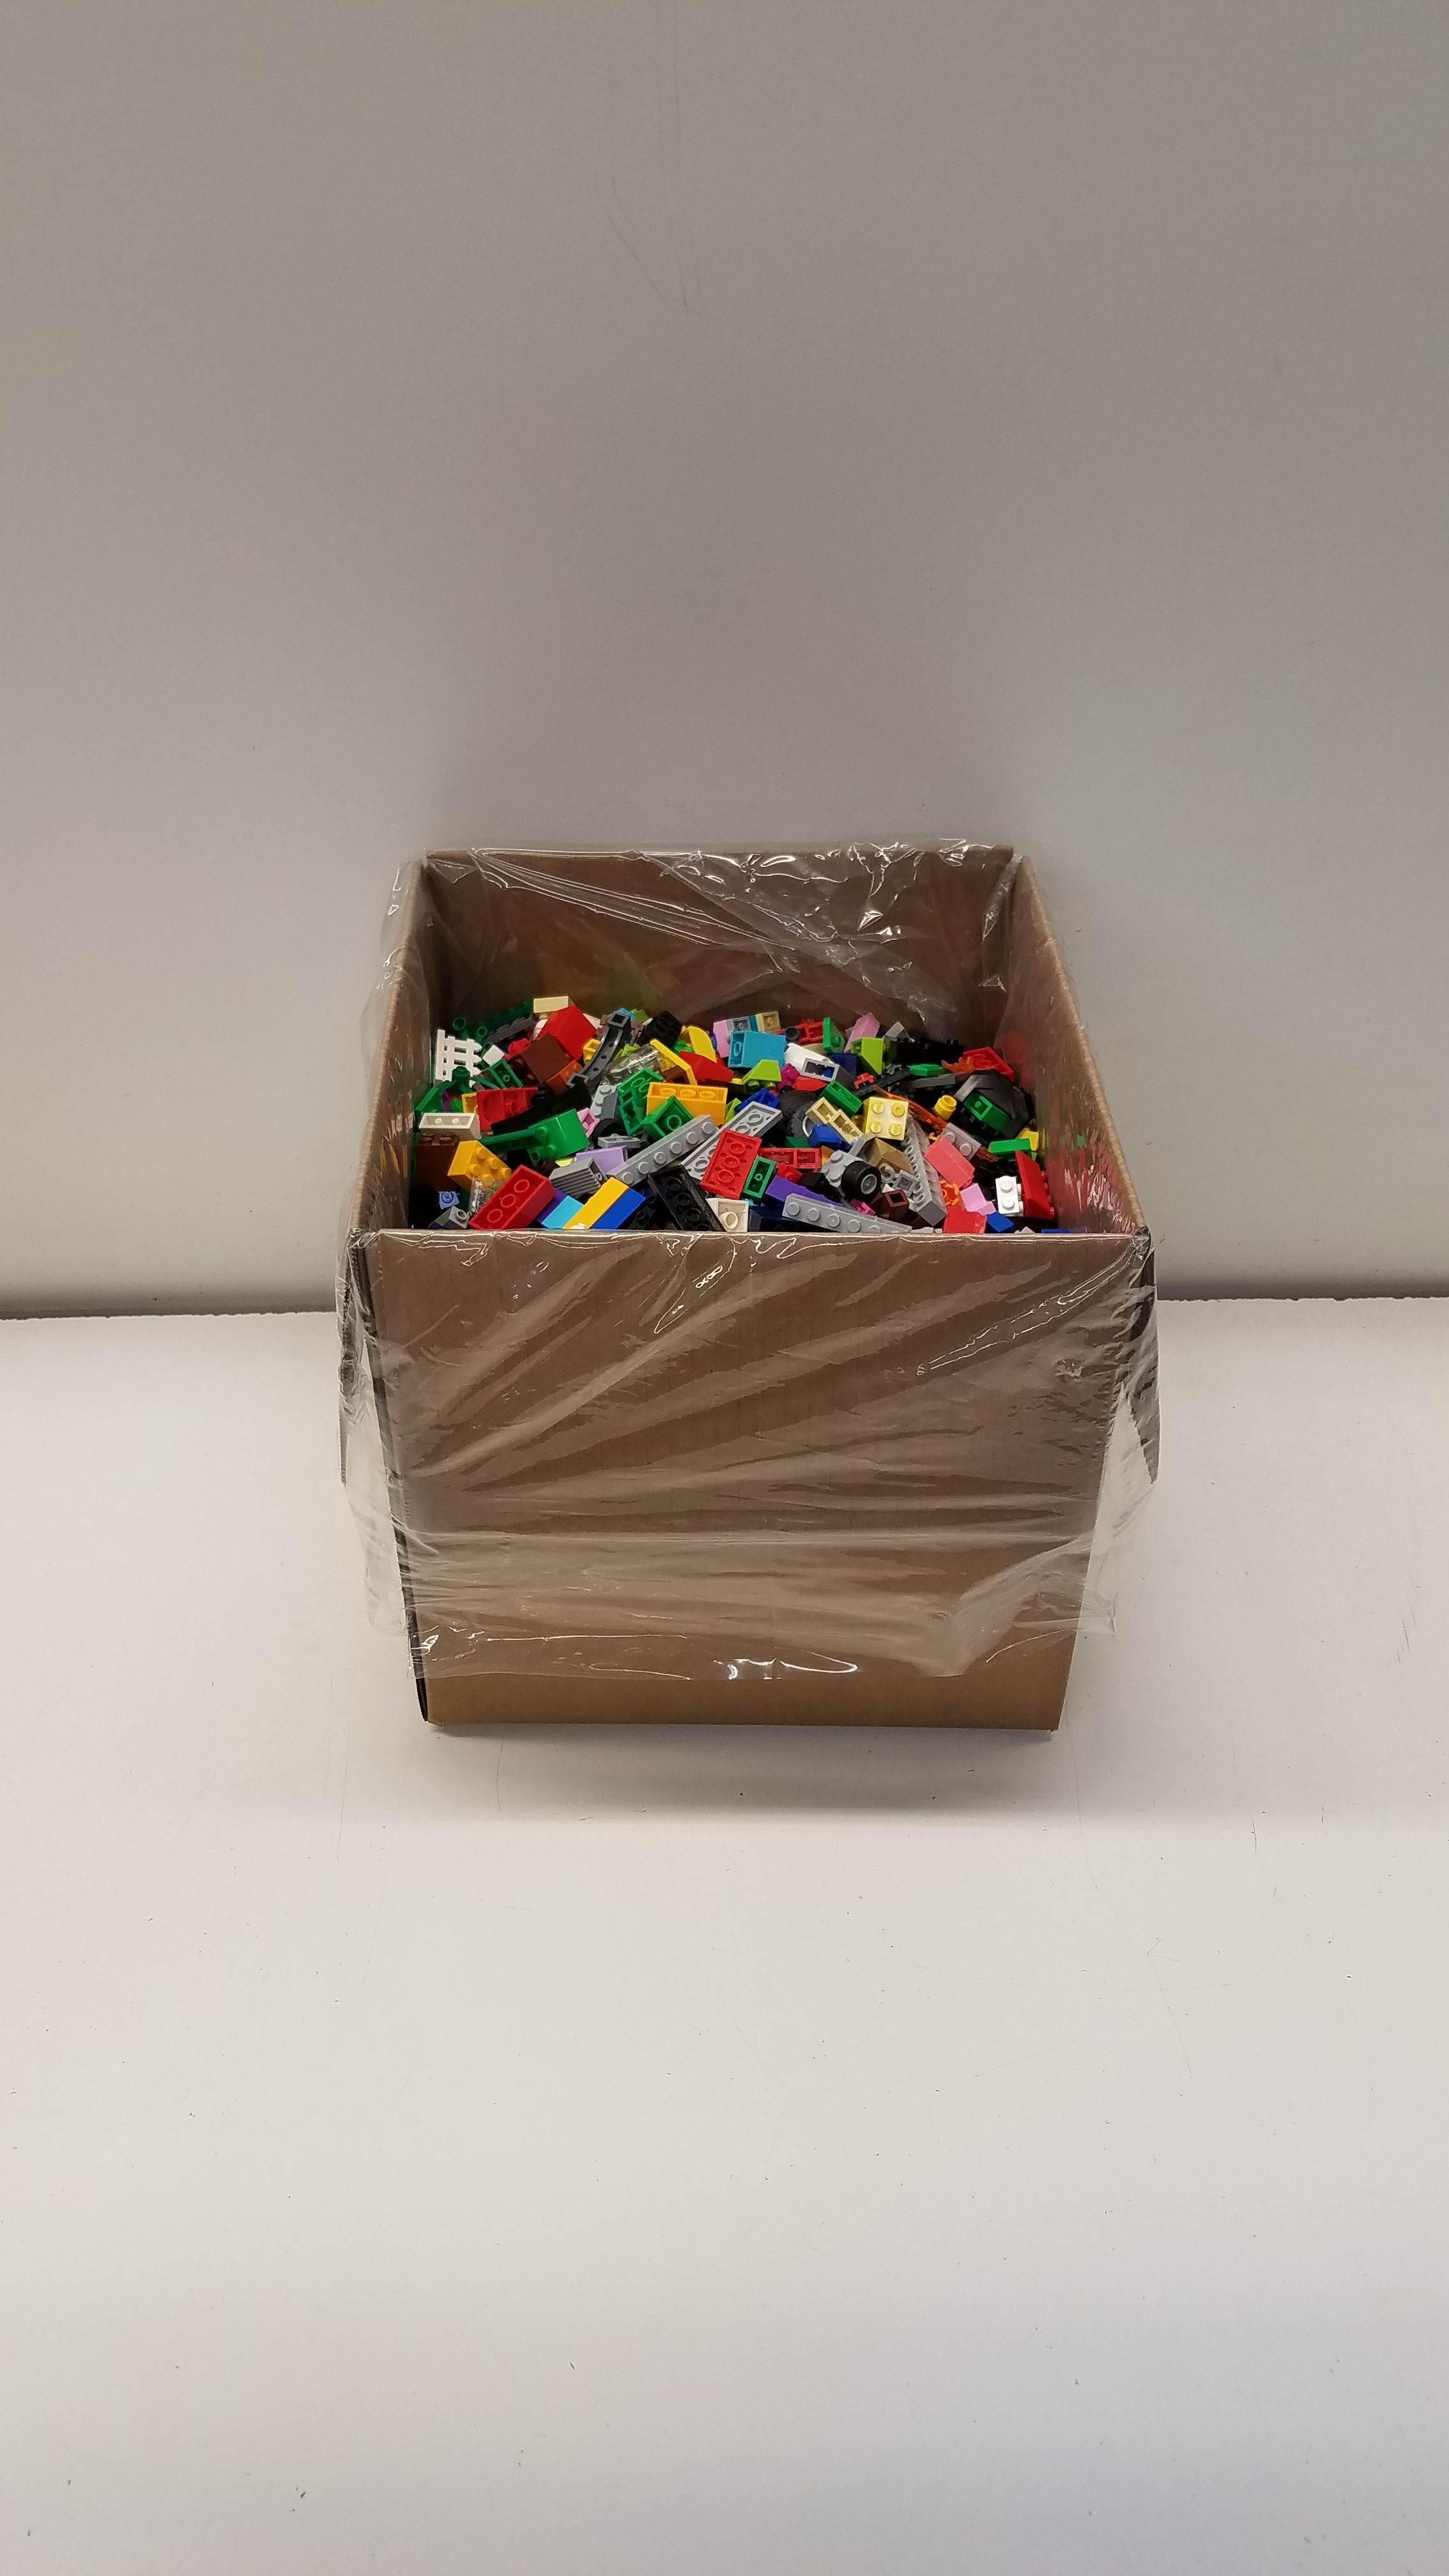 How to Store Empty Lego Boxes